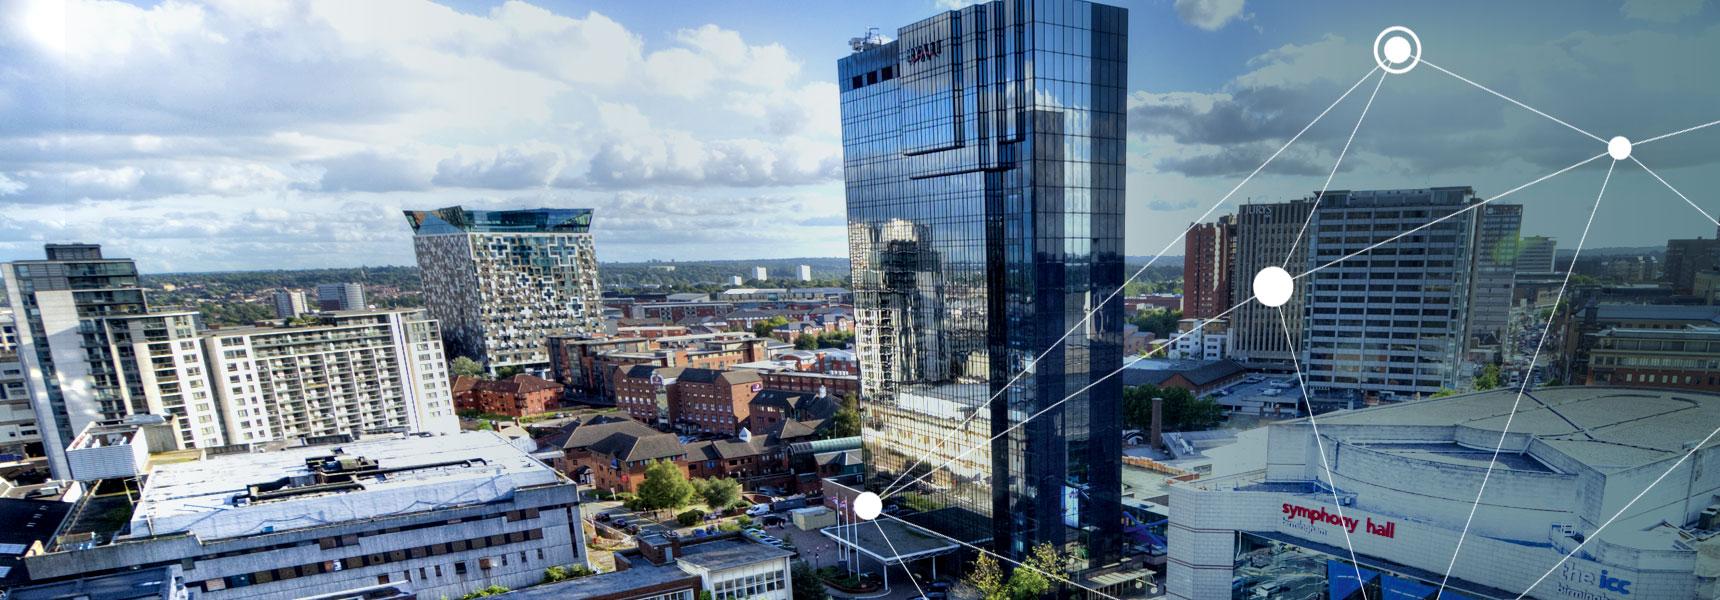 Birmingham City Council and Dudley Council sign landmark lease agreements to accelerate the roll-out of 5G in the West Midlands